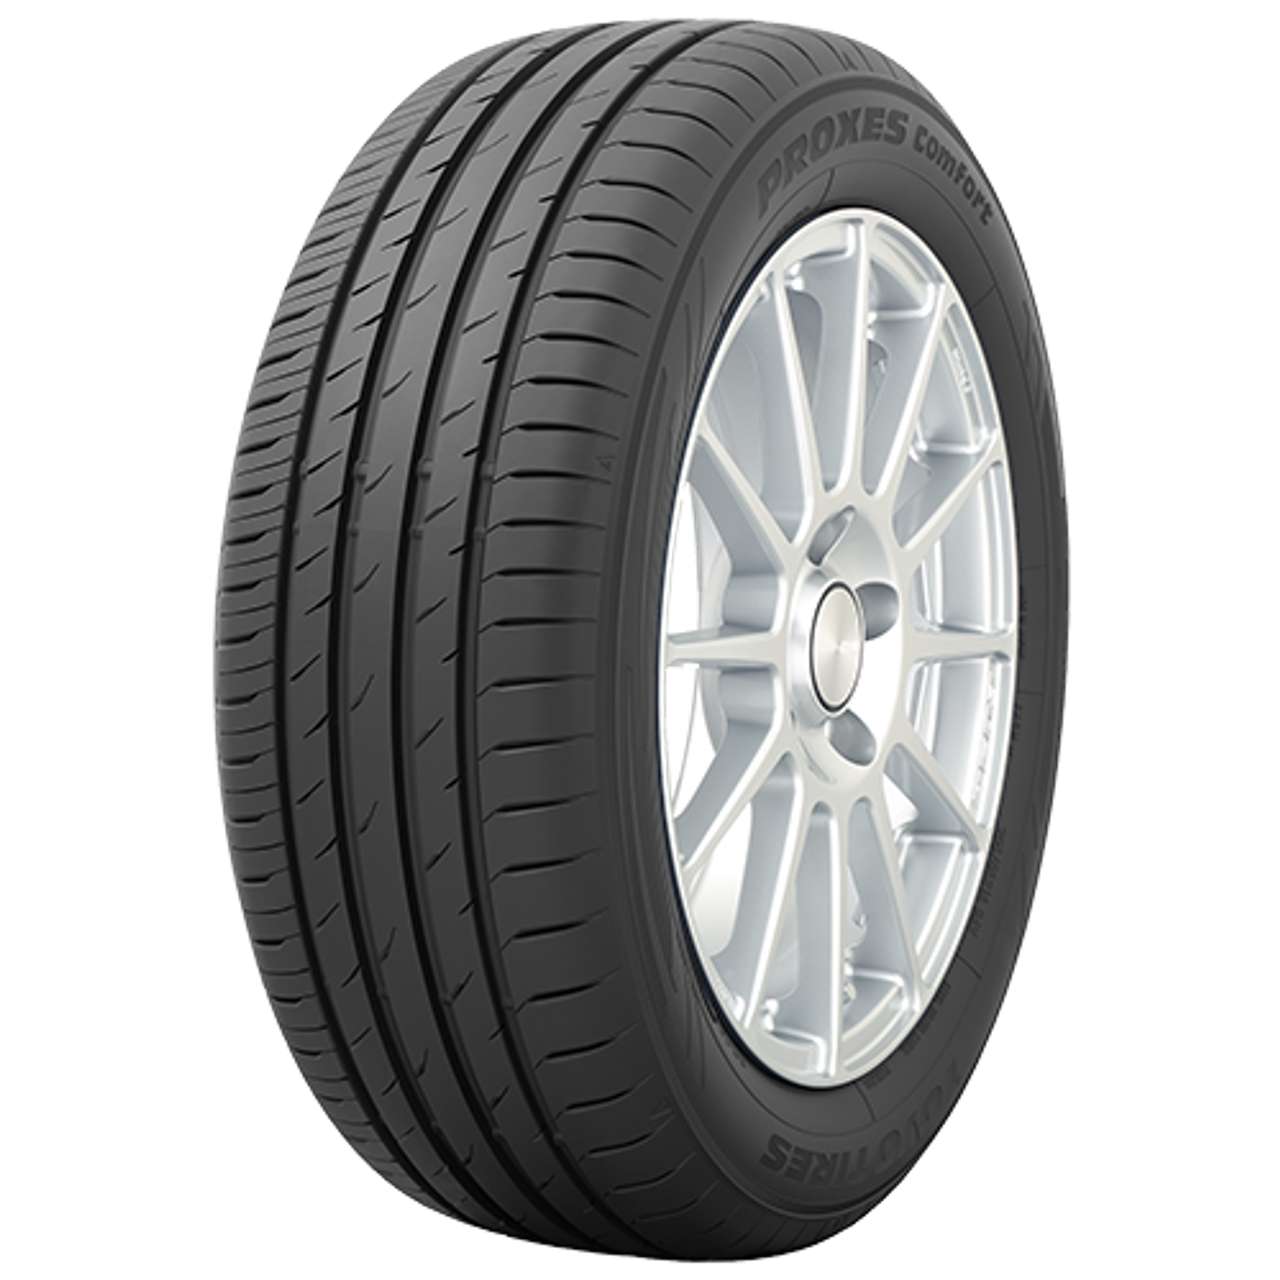 TOYO PROXES COMFORT 215/65R16 102V BSW XL